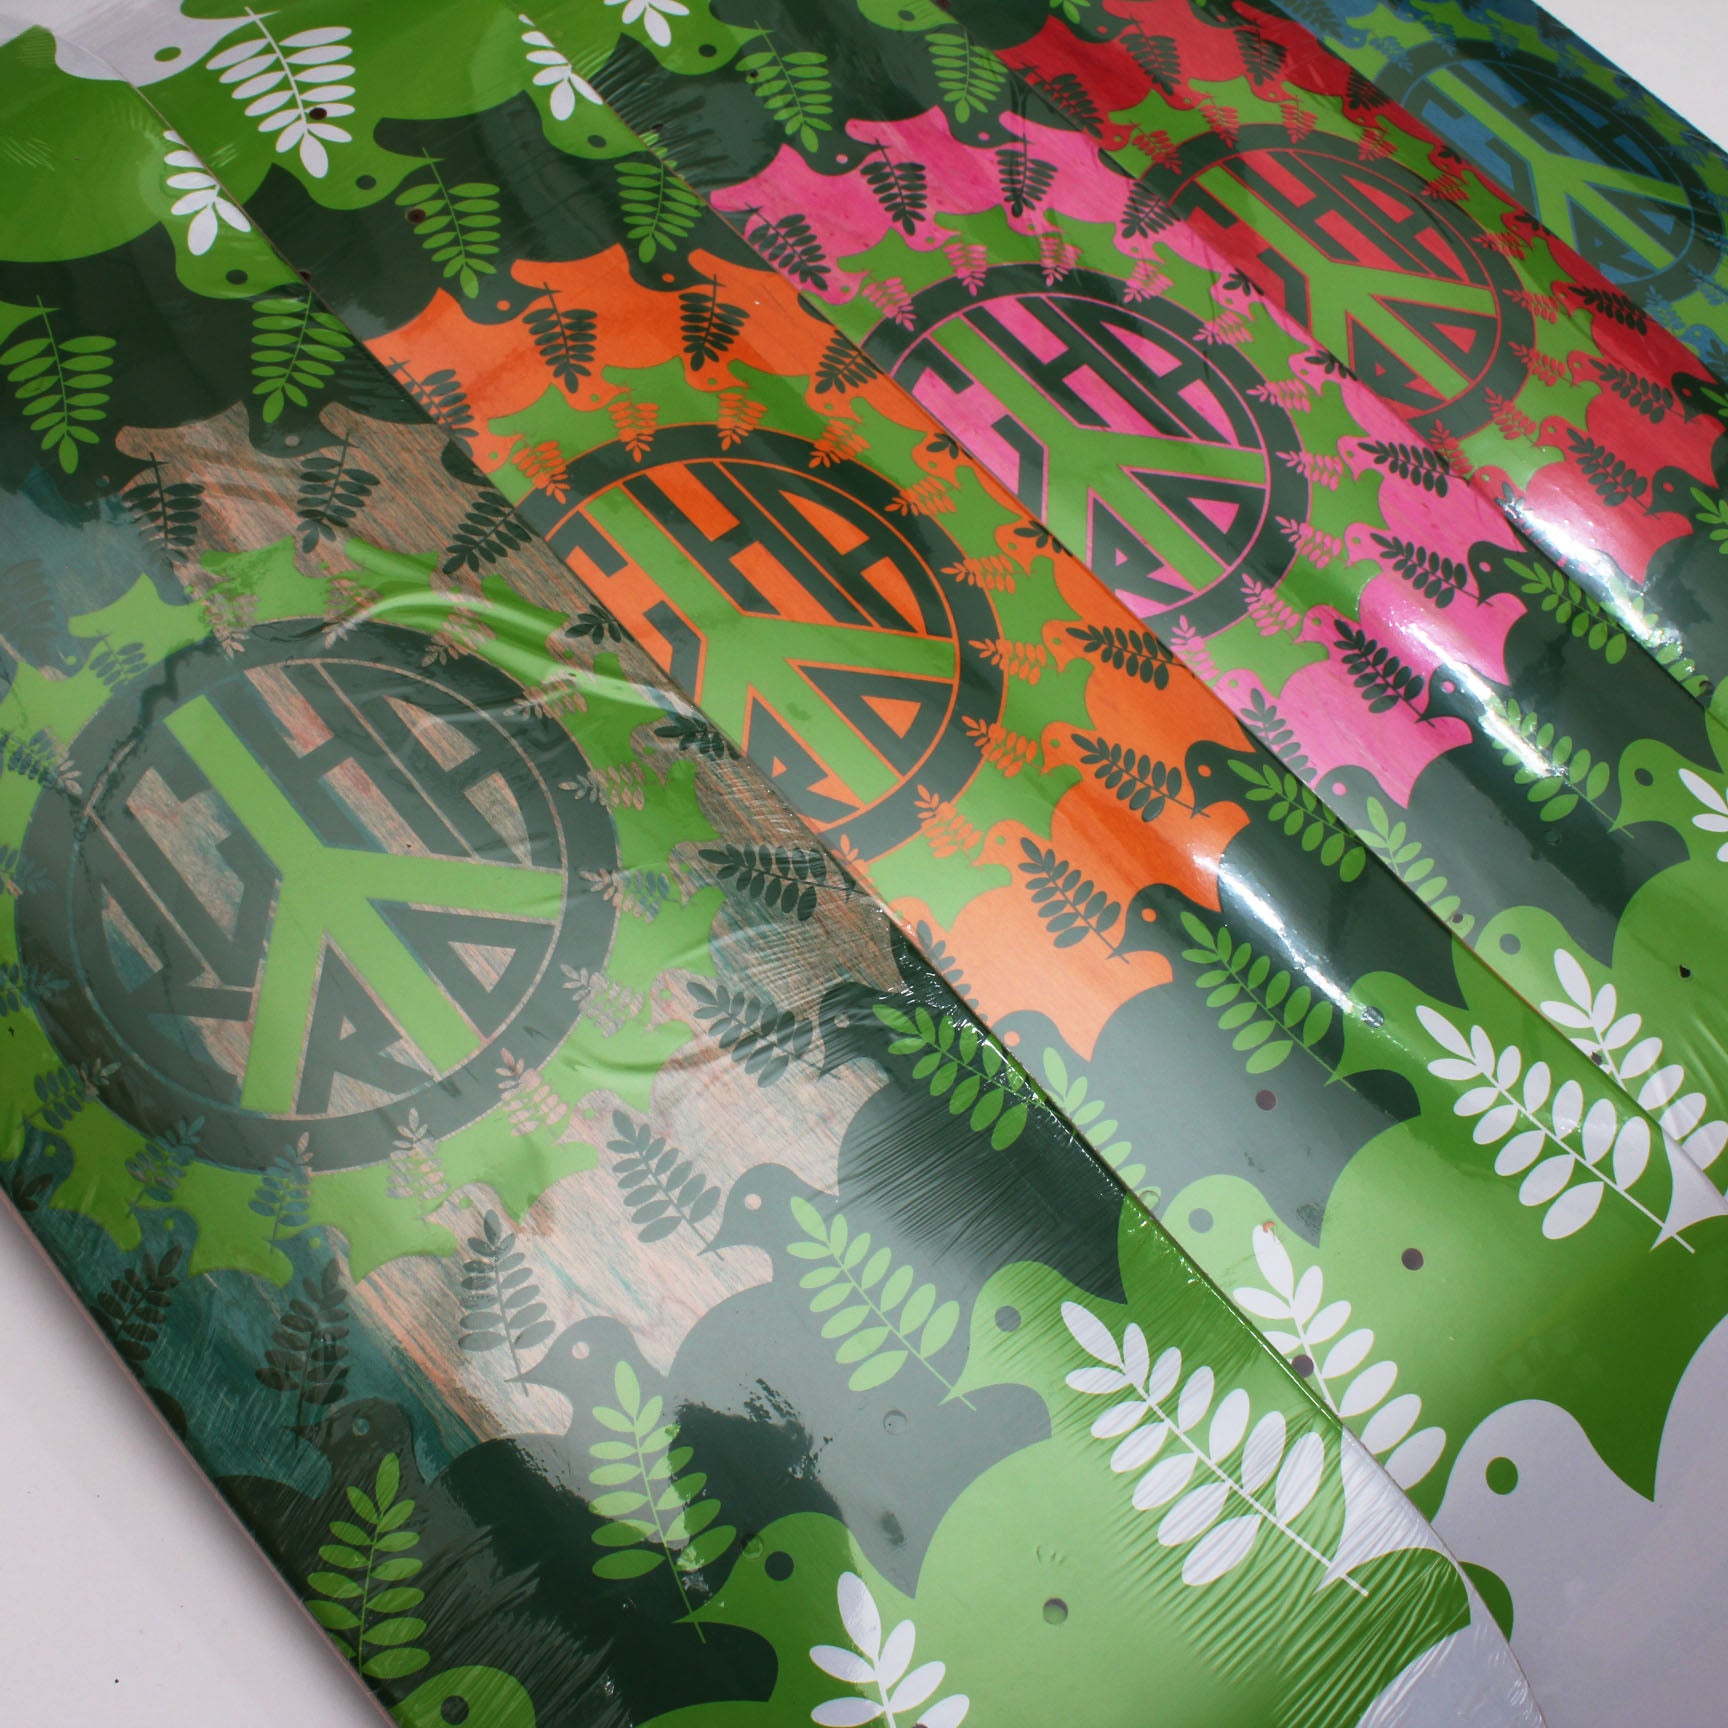 Orchard Peace by Damion Silver Deck 8.375"